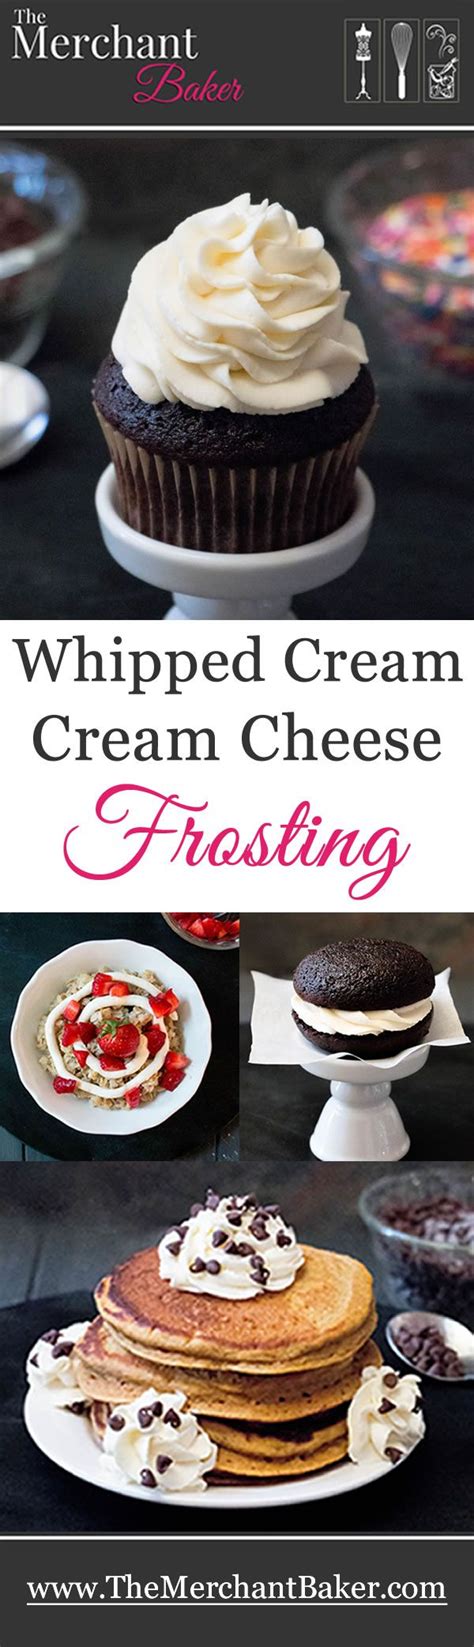 Soften cream cheese by microwaving unwrapped cheese block for 20 seconds. Whipped Cream Cream Cheese Frosting with Video! | Recipe | Delicious strawberry cake, Whipped ...